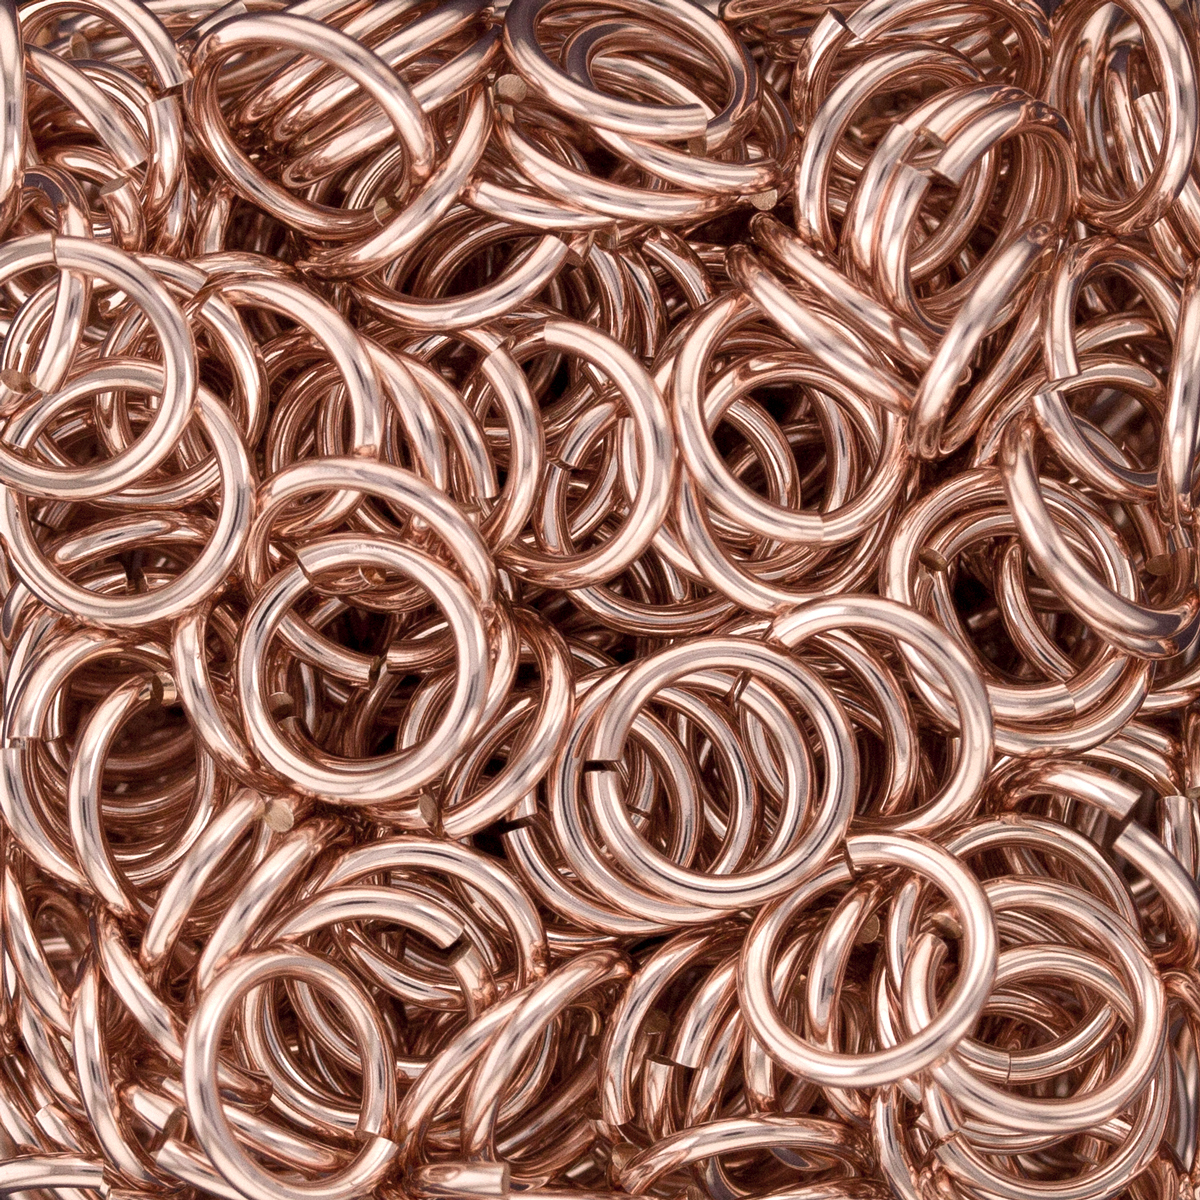 Stainless Steel Rose Gold Saw Cut Jump Rings 100 Pk Enc0005